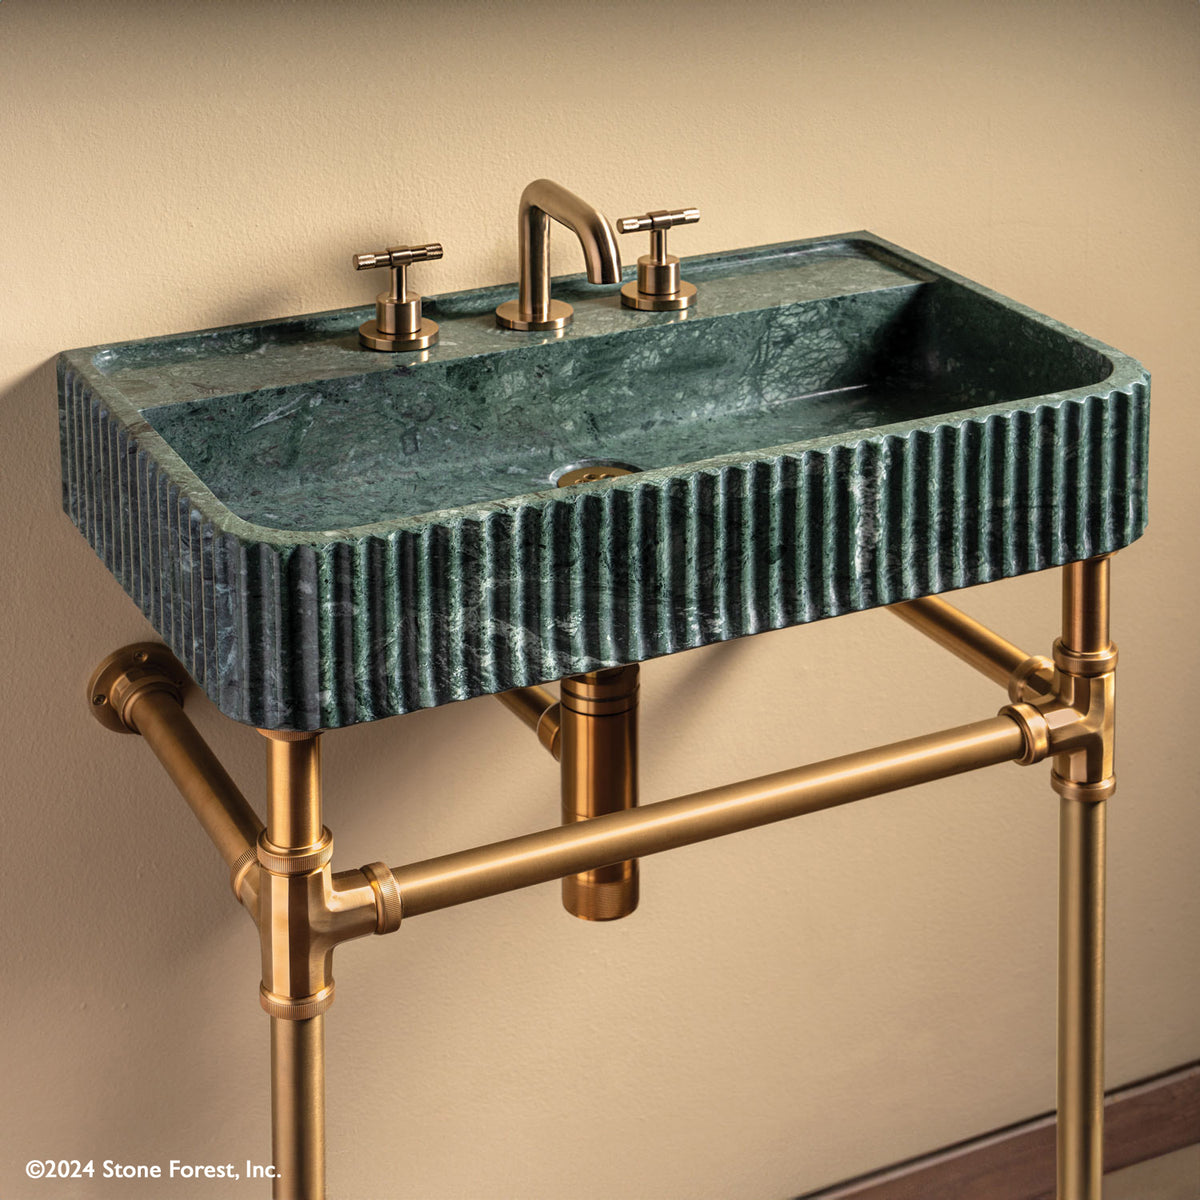 Fluted Lumbre Bath Sink carved from Verde Indio Marble on top of an Aged Brass  Elemental  Facet Crossbar Stand image 2 of 4